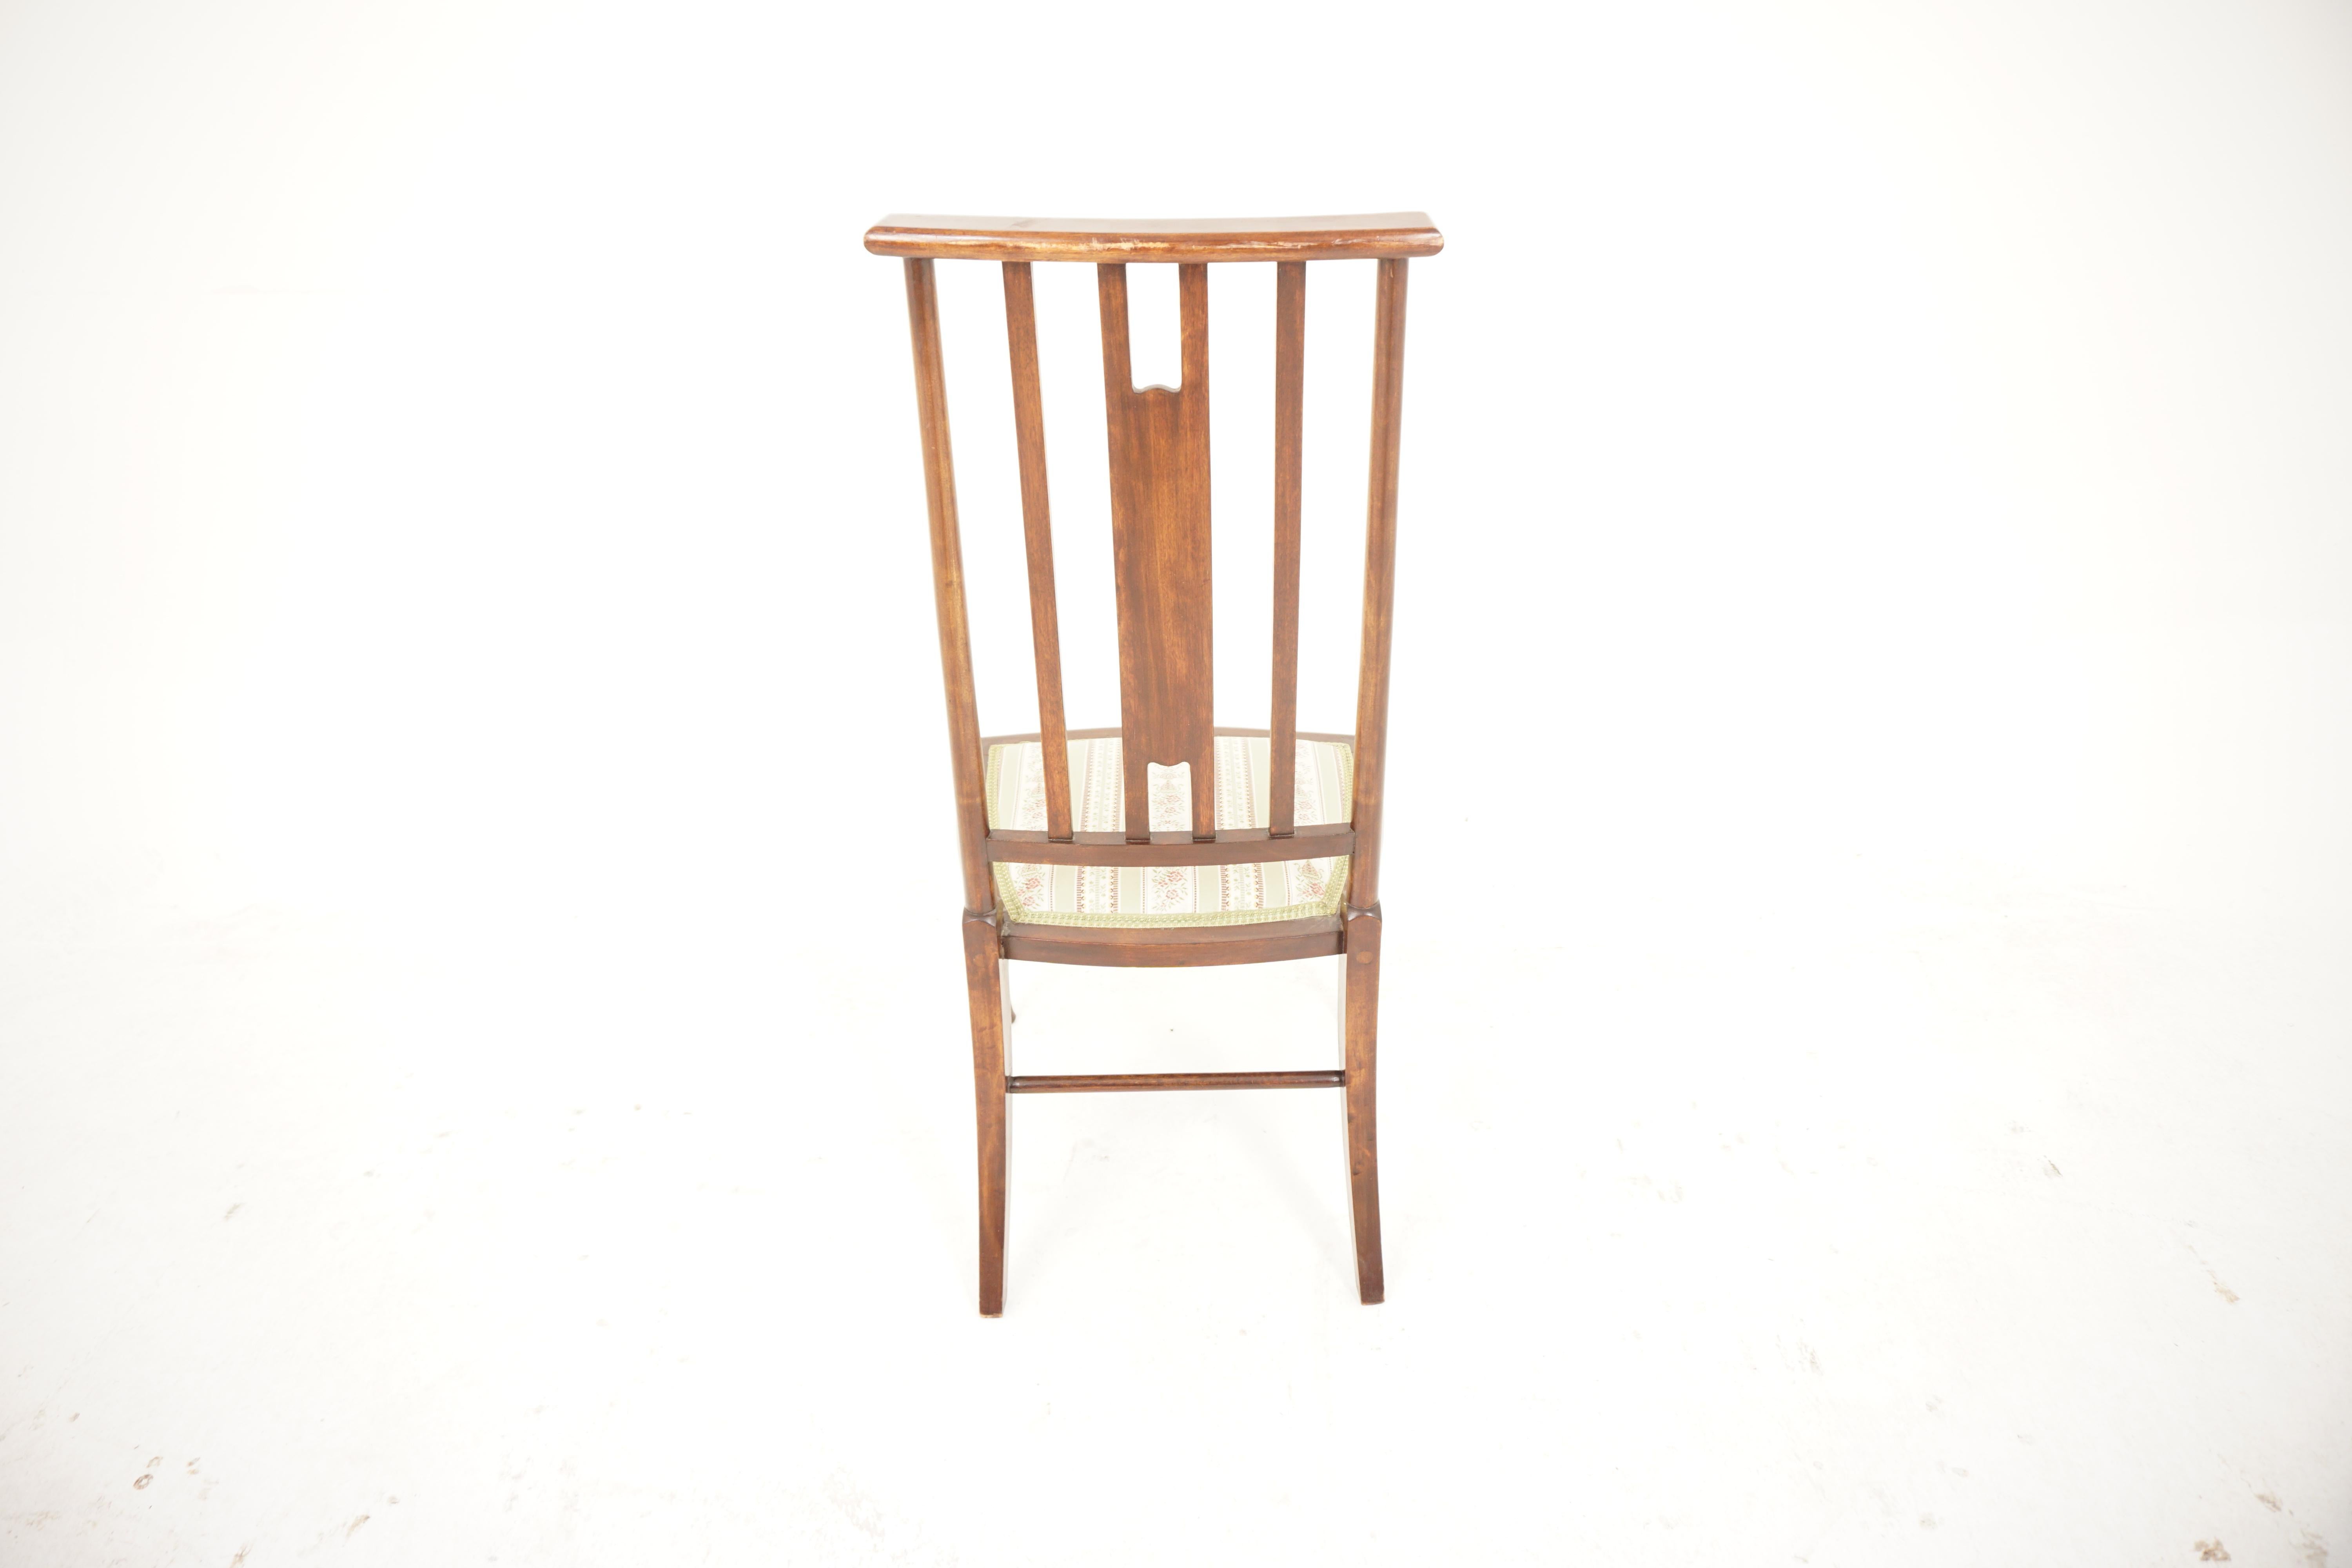 Early 20th Century Art Nouveau Walnut Inlaid Bedroom Chair, Scotland 1910, H903 For Sale